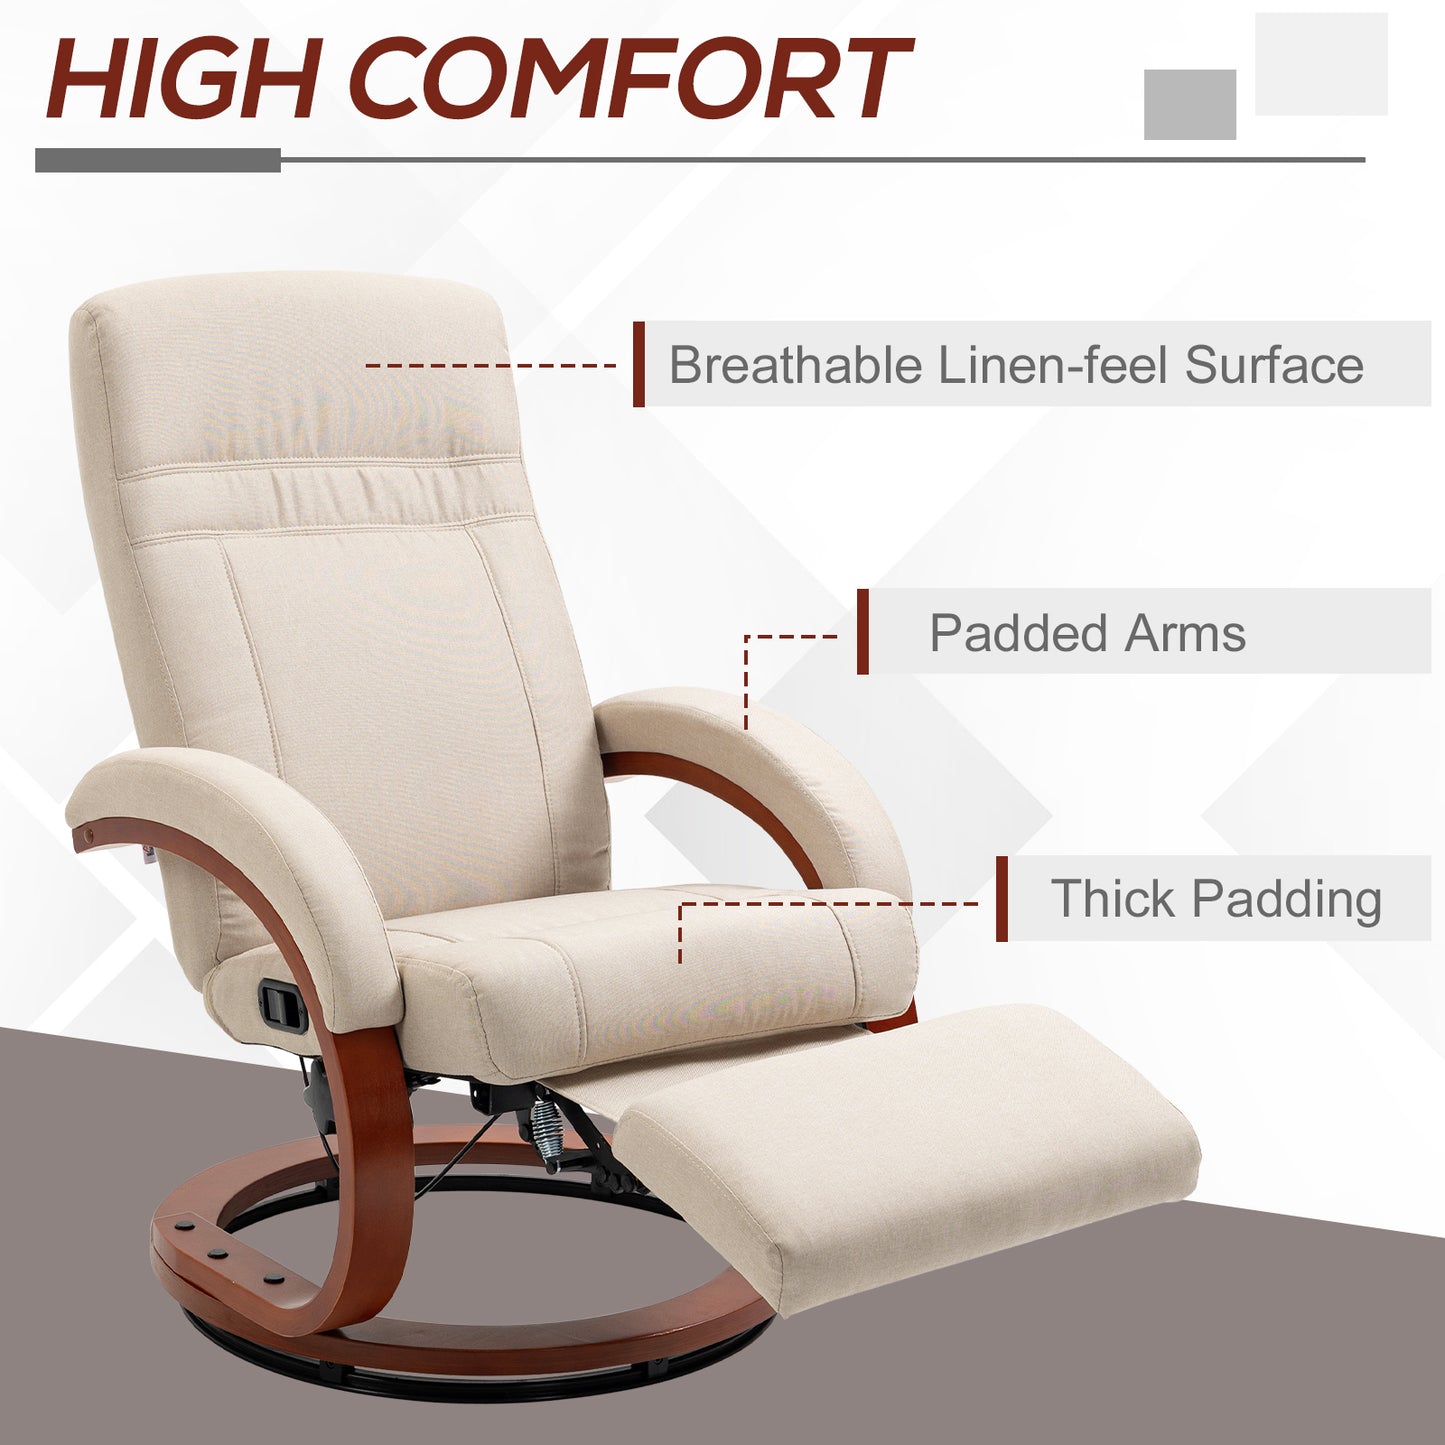 HOMCOM Swivel Recliner Chair with Extended Footrest Manual Reclining Armchair with Wood Base for Living Room Bedroom Beige